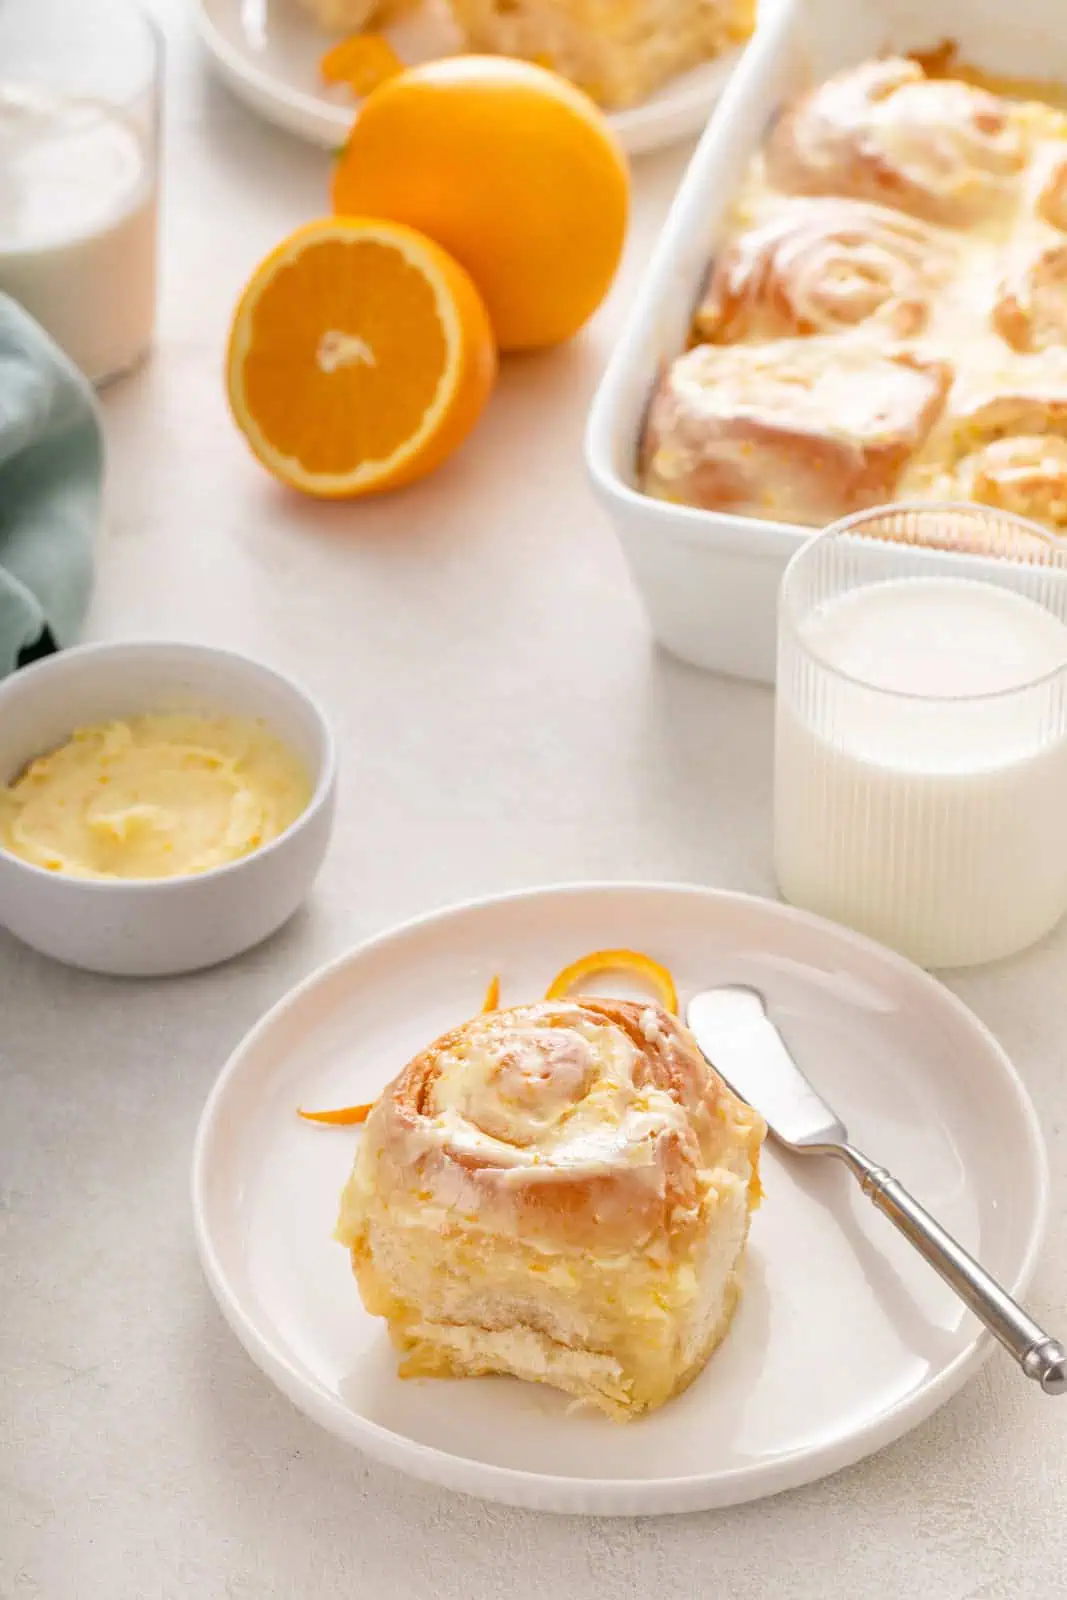 Frosted orange roll on a white plate with a glass of milk and the pan of rolls in the background.